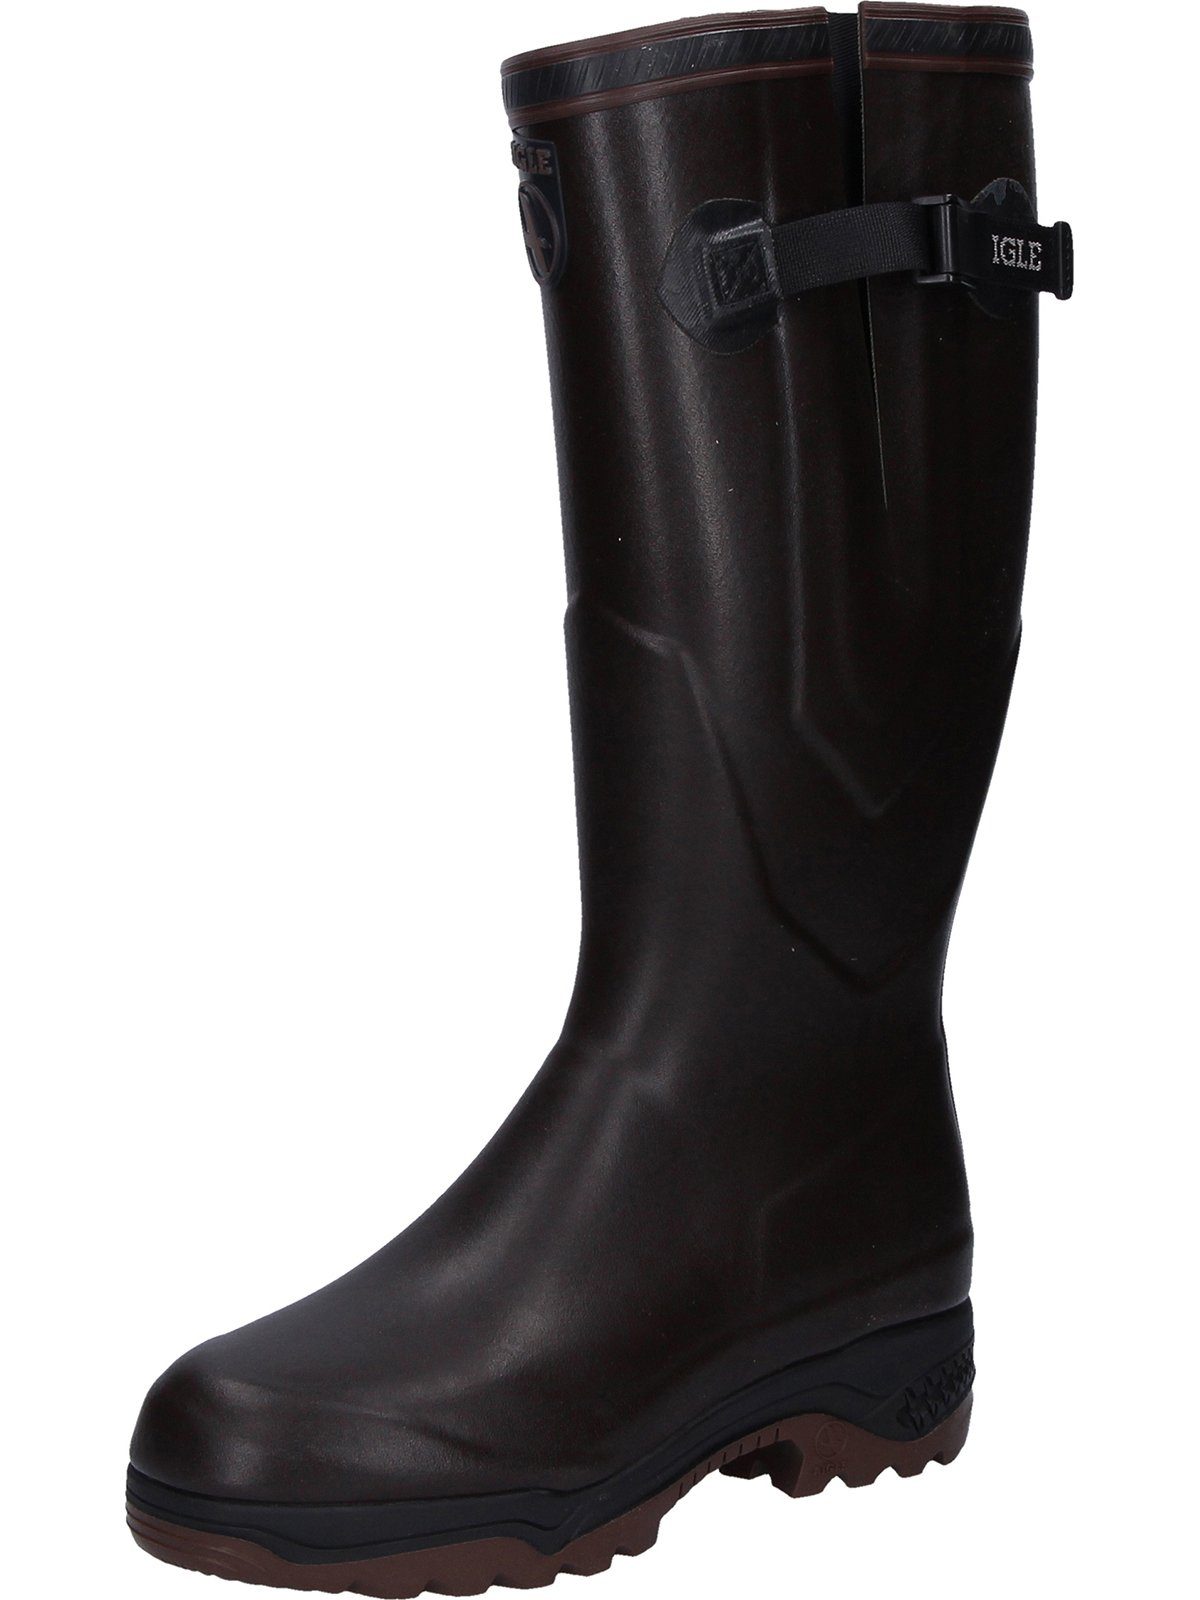 Parcours® Stiefel Iso Brun Aigle (Braun) 2